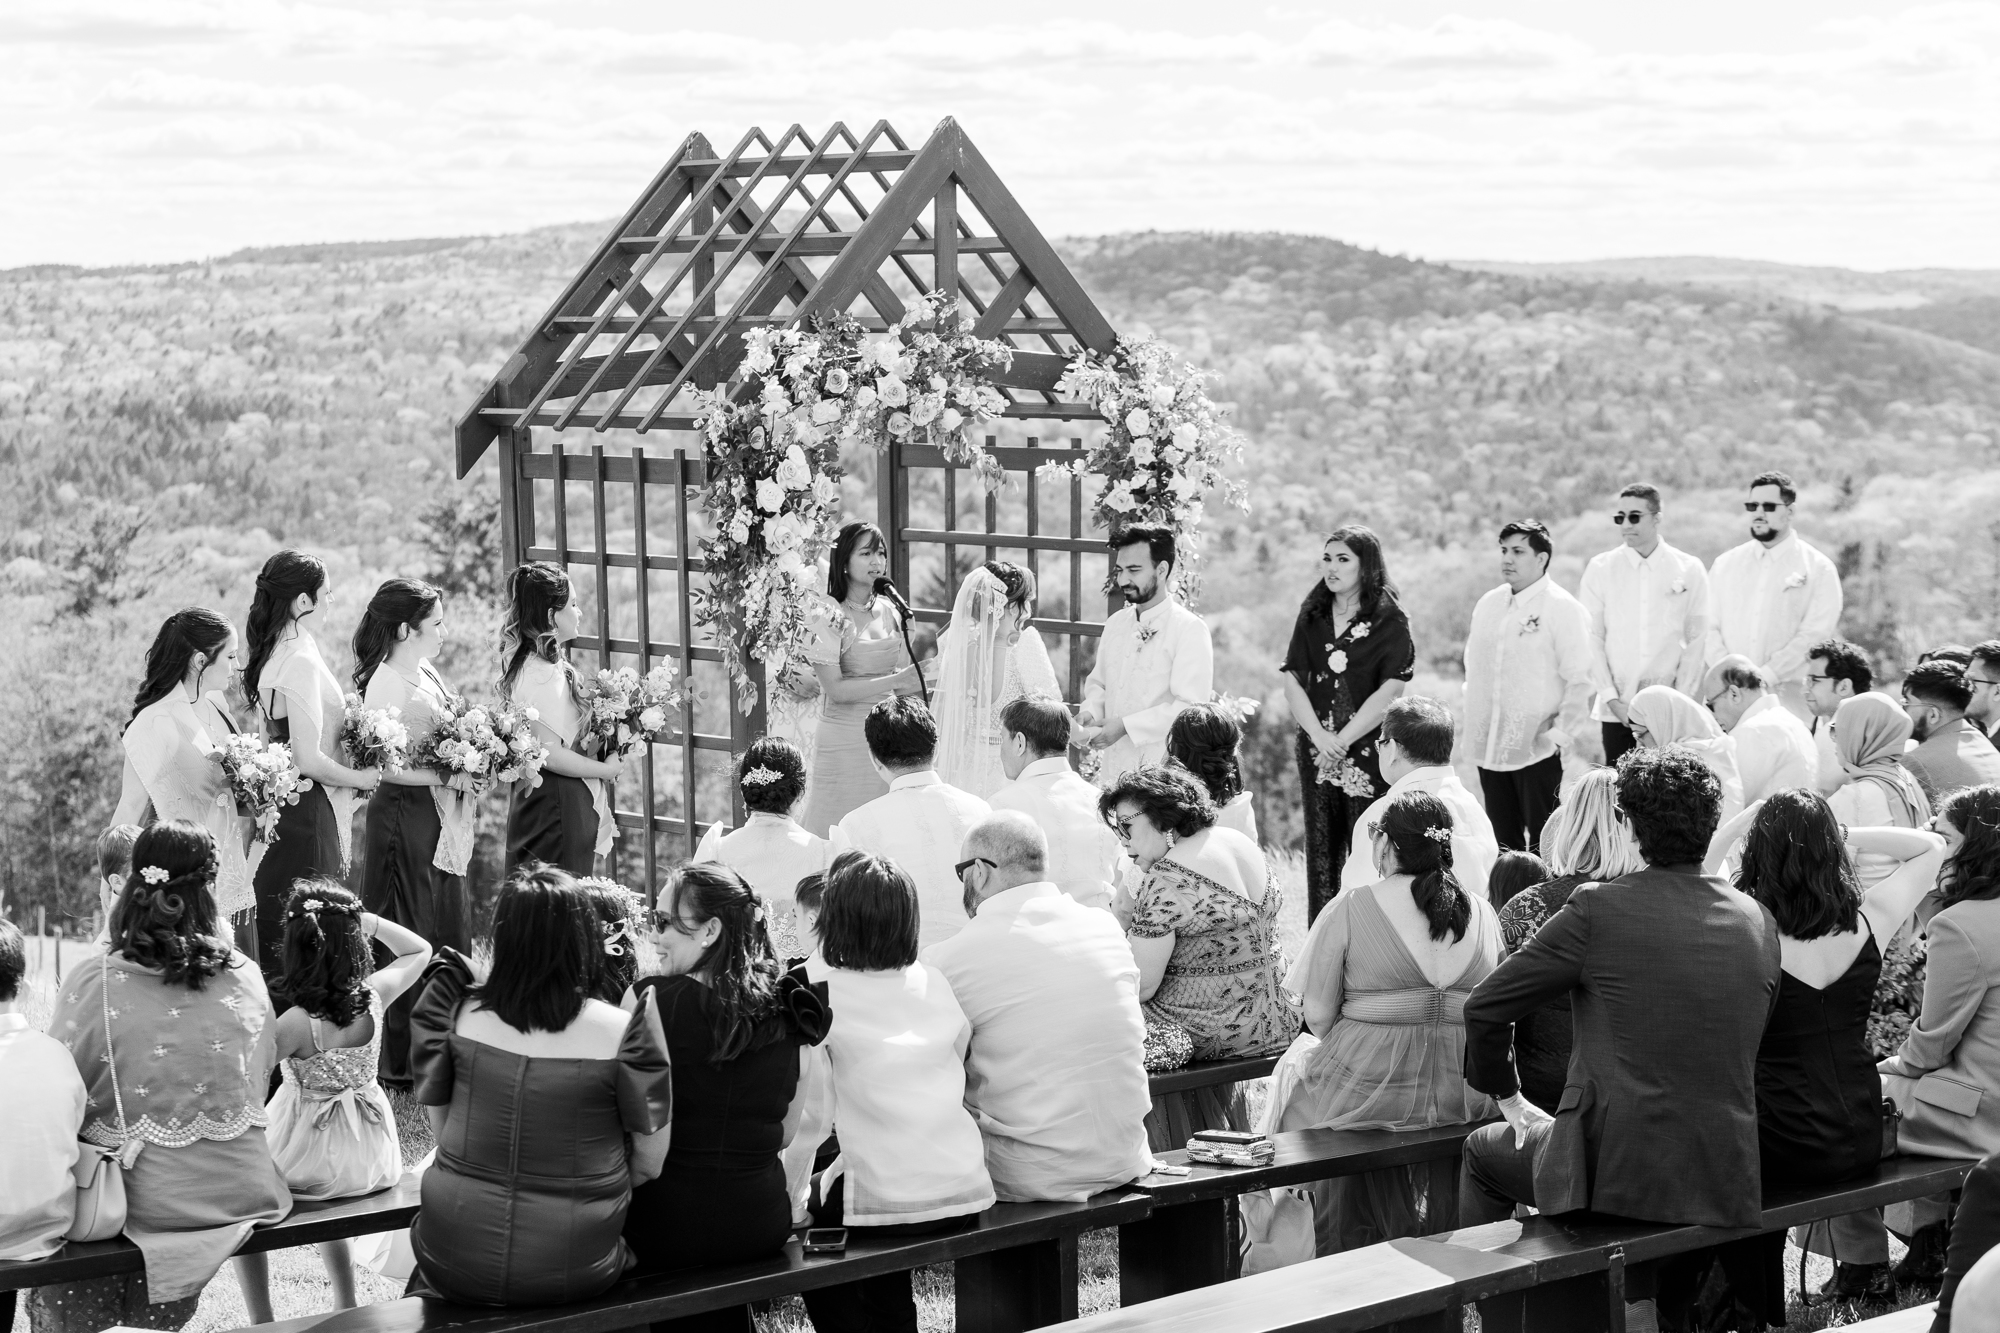 Personal Seminary Hill Wedding in the Summertime